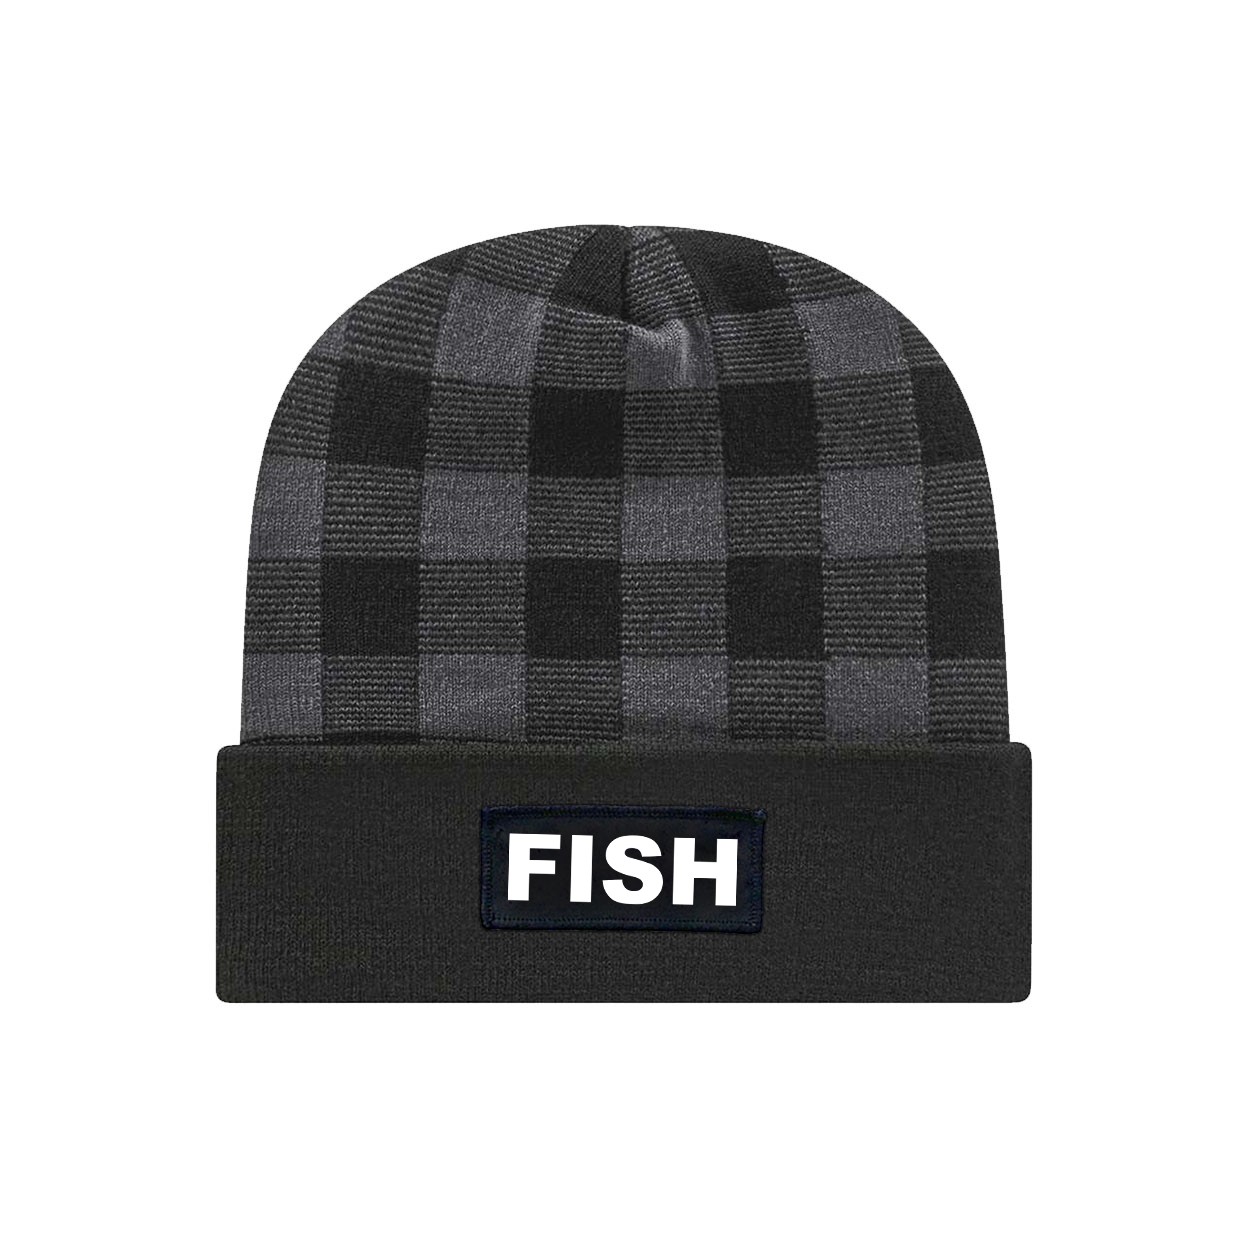 Fish Brand Logo Night Out Woven Patch Roll Up Plaid Beanie Black/Heather Gray (White Logo)